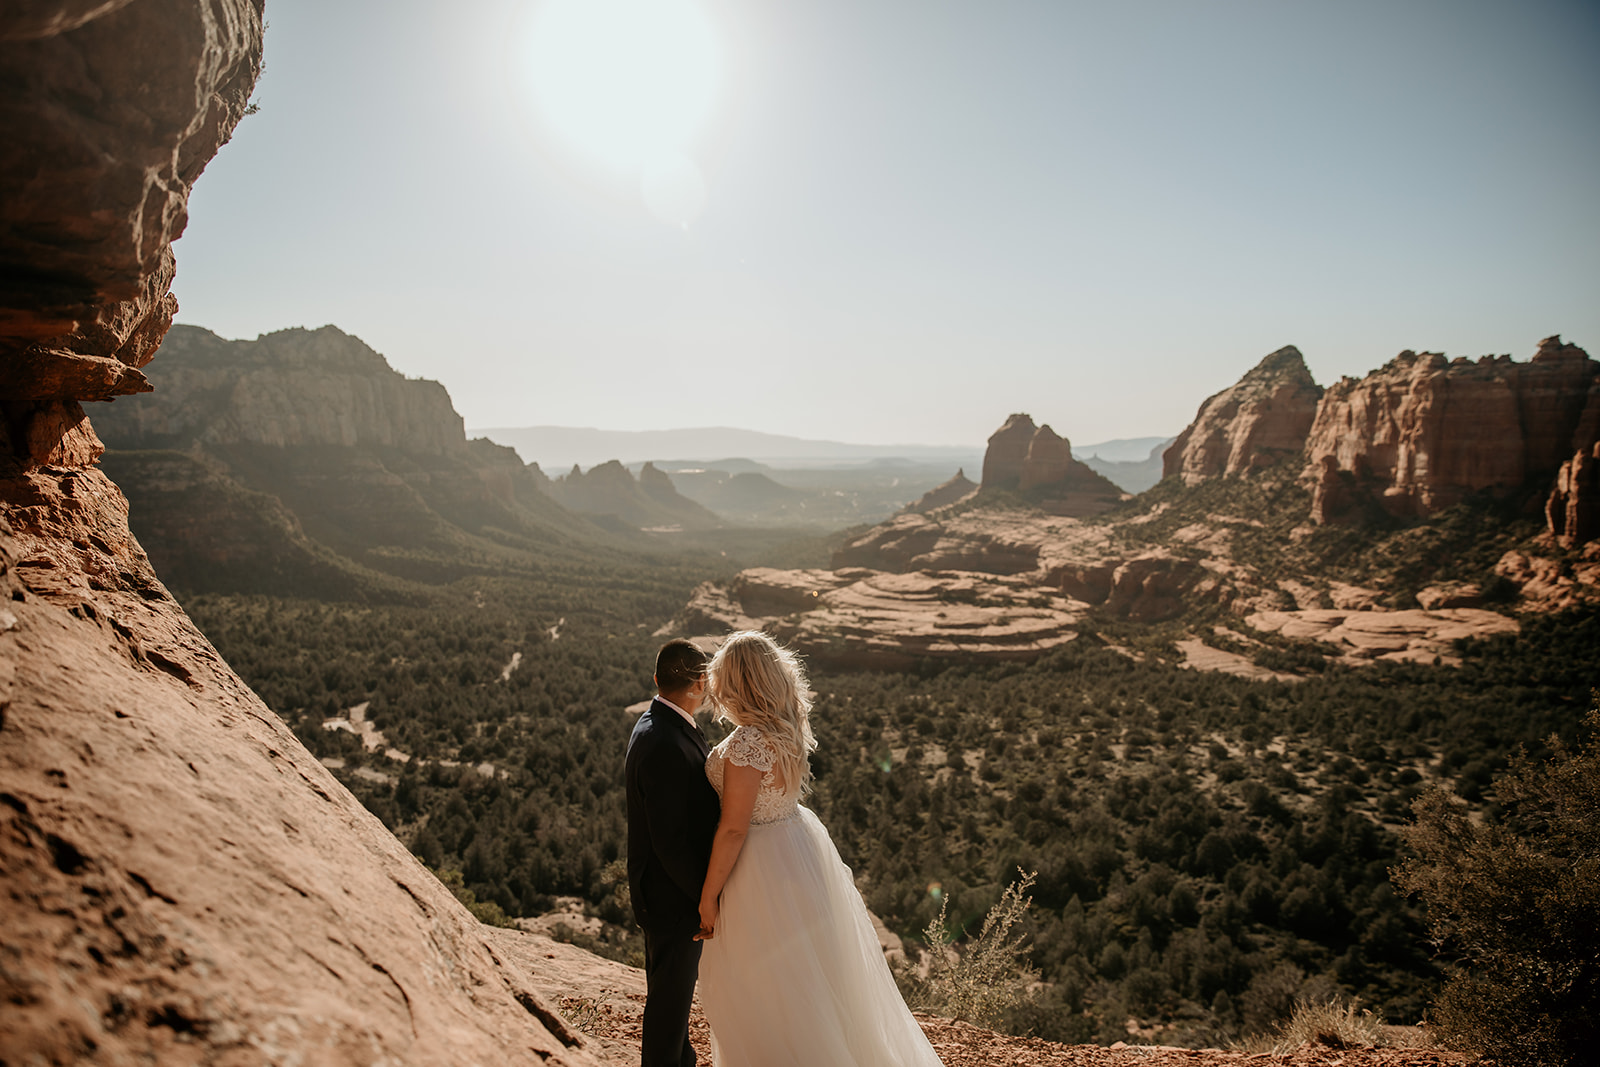 Bride and groom at their sunny elopement in Sedona, Arizona.